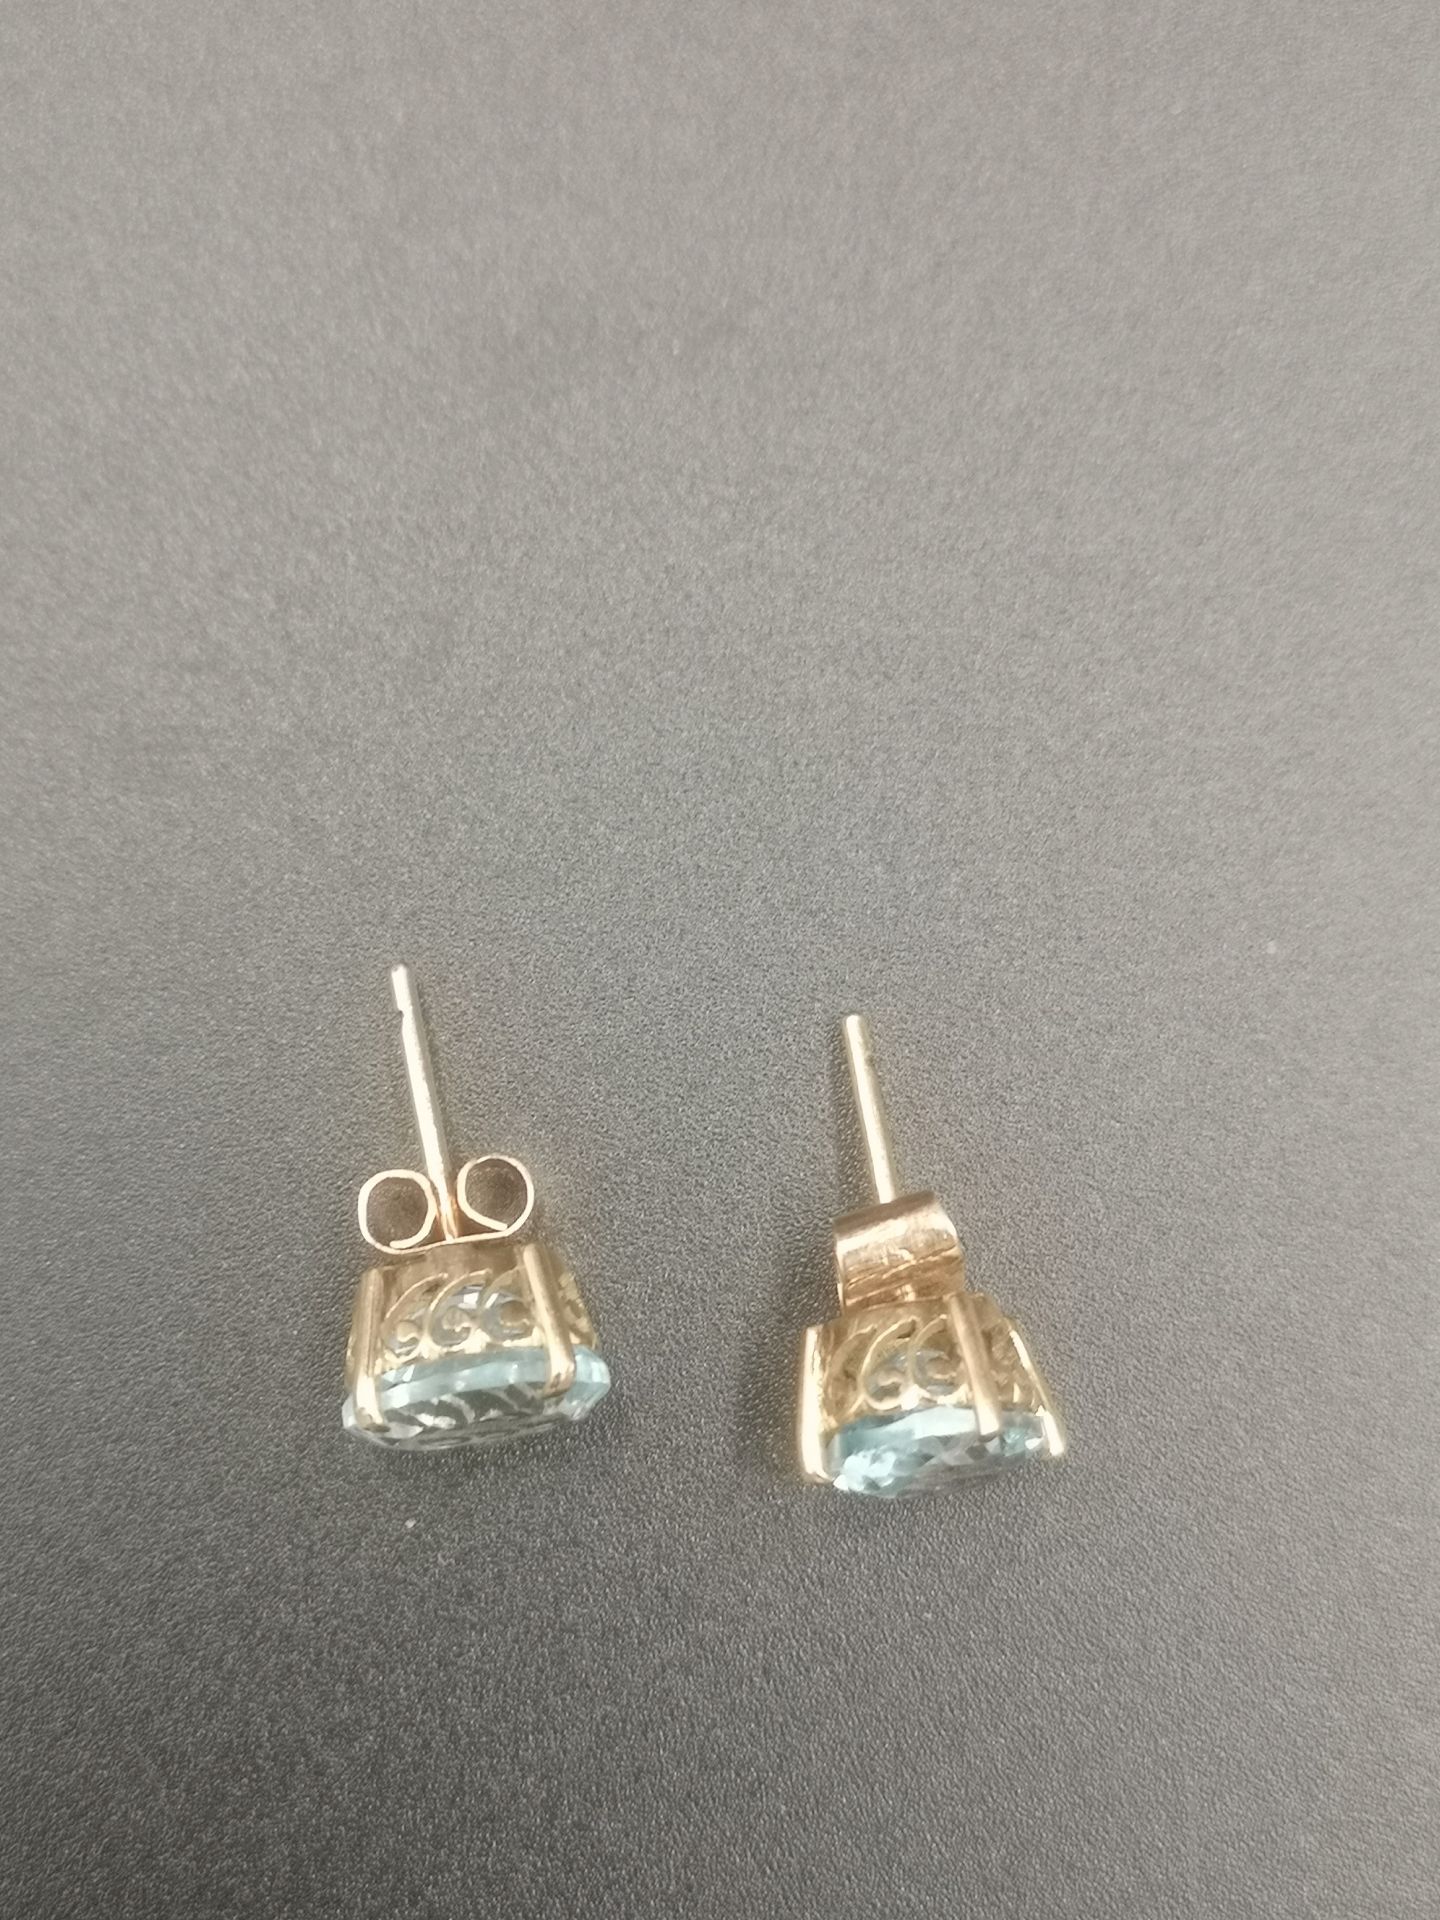 14ct gold and blue topaz earrings - Image 4 of 6